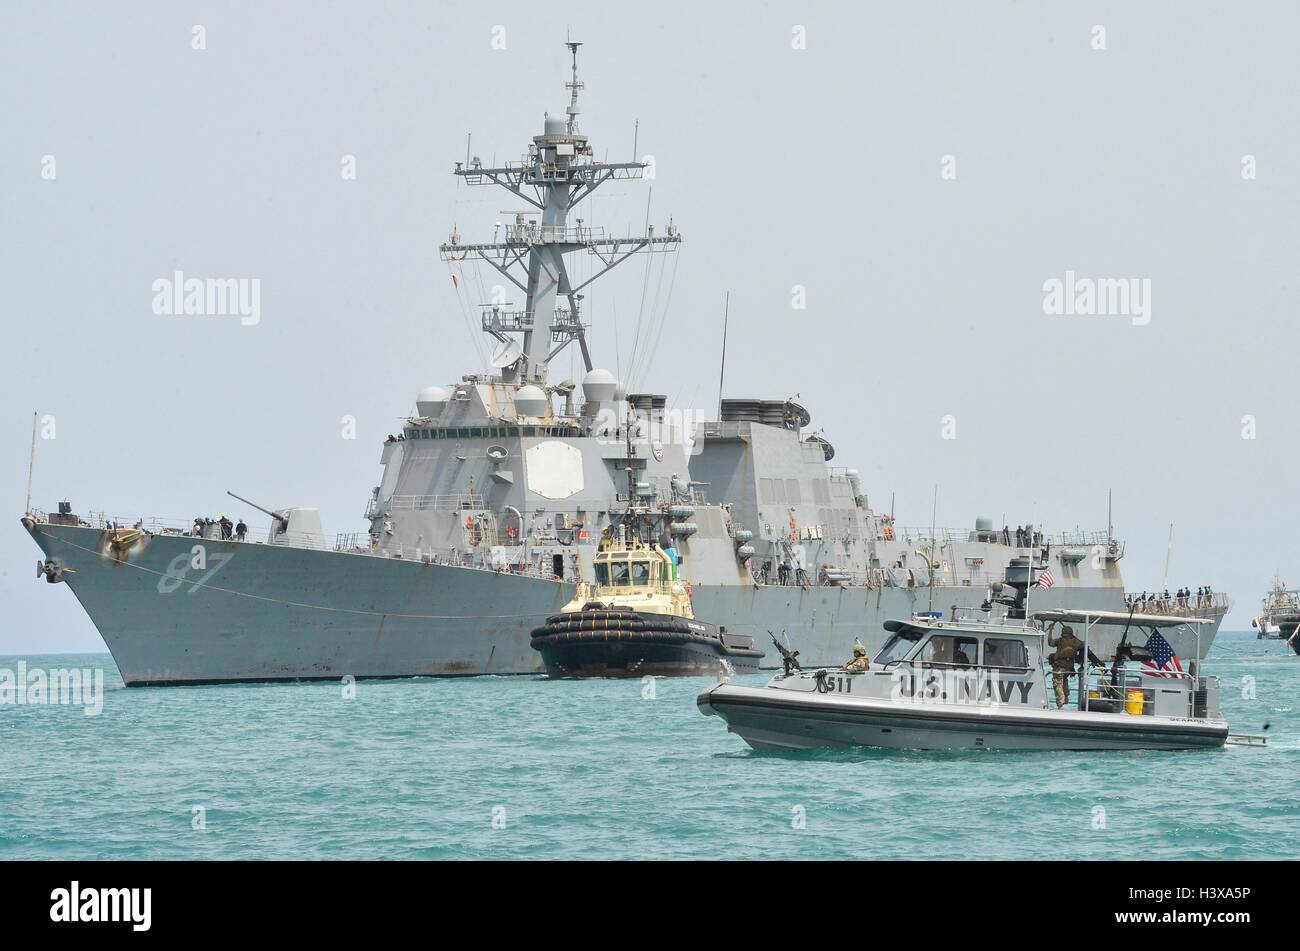 At Sea. 23rd July, 2016. The US Navy Arleigh Burke-class guided-missile destroyer USS Mason pulls into port escorted by Coastal Riverine Squadron 8 sea ark patrol boats July 23, 2016 in the Port of Djibouti. The USS Mason was fired upon by Houthi rebels while sailing off the coast of Yemen in the southern end of the Red Sea on October 12, 2016 and the USS Nitze returned missile fire destroying ground stations in Yemen. Credit:  Planetpix/Alamy Live News Stock Photo